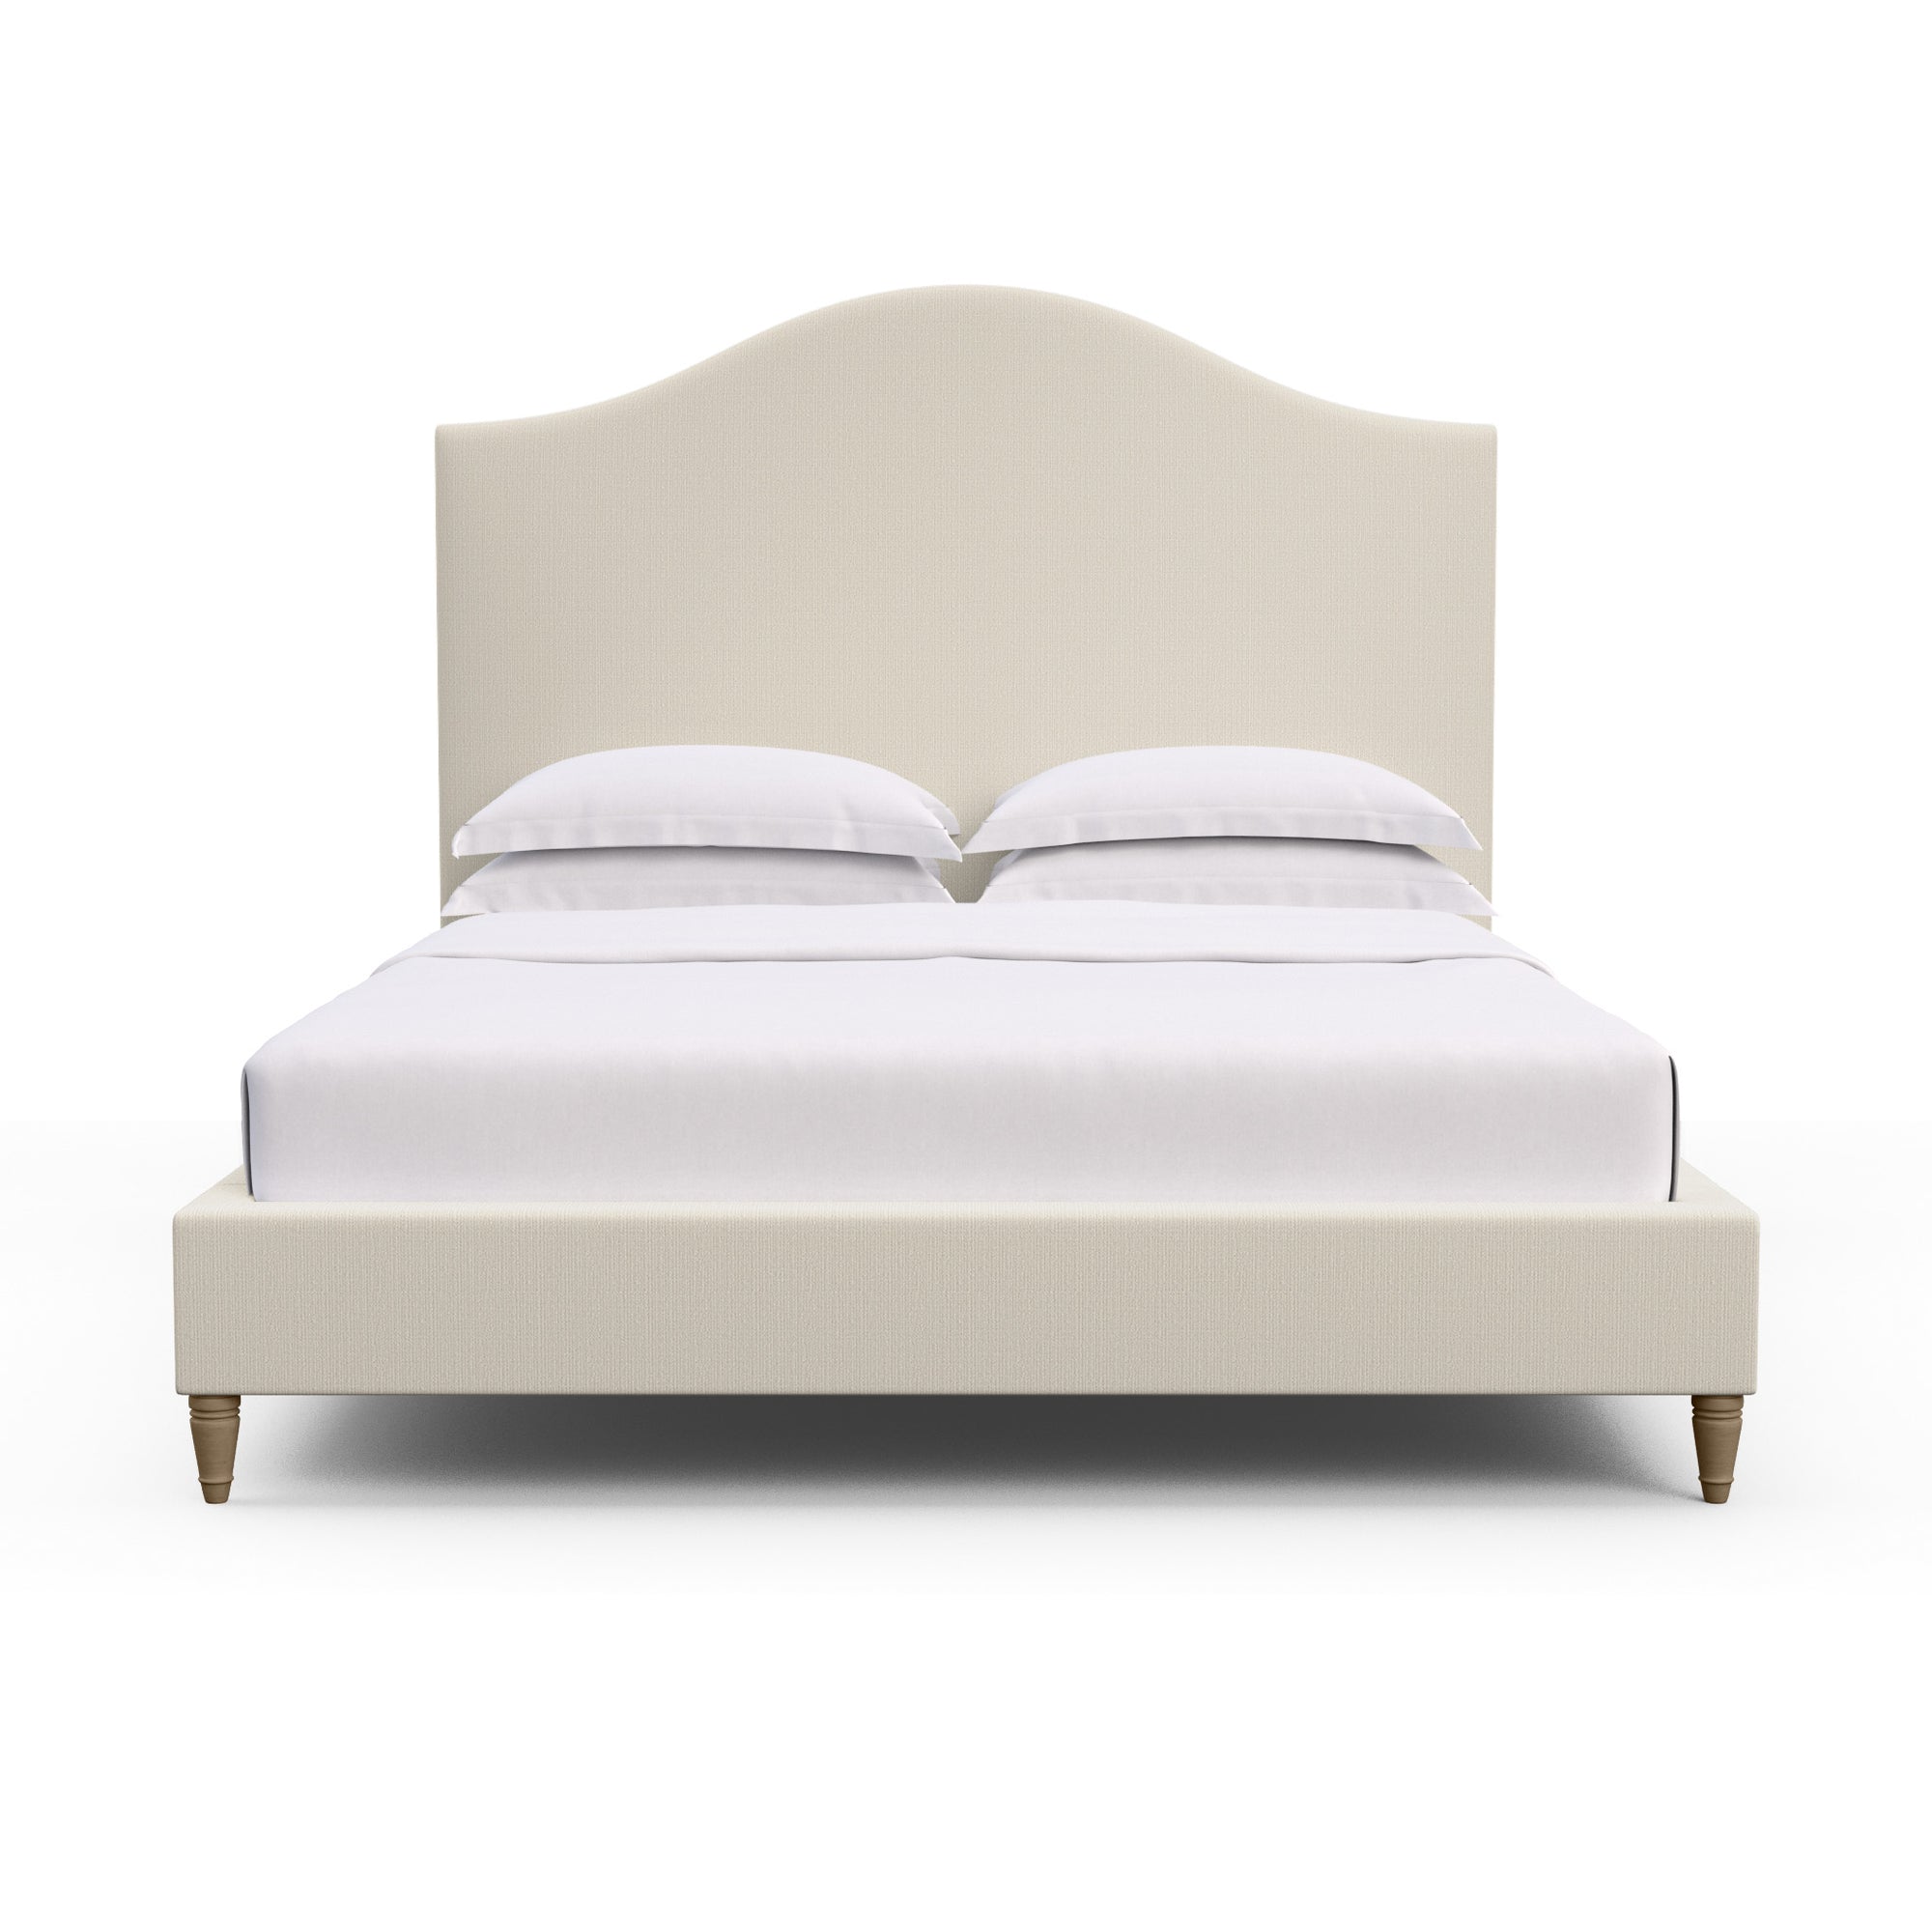 Montague Arched Panel Bed - Oyster Box Weave Linen